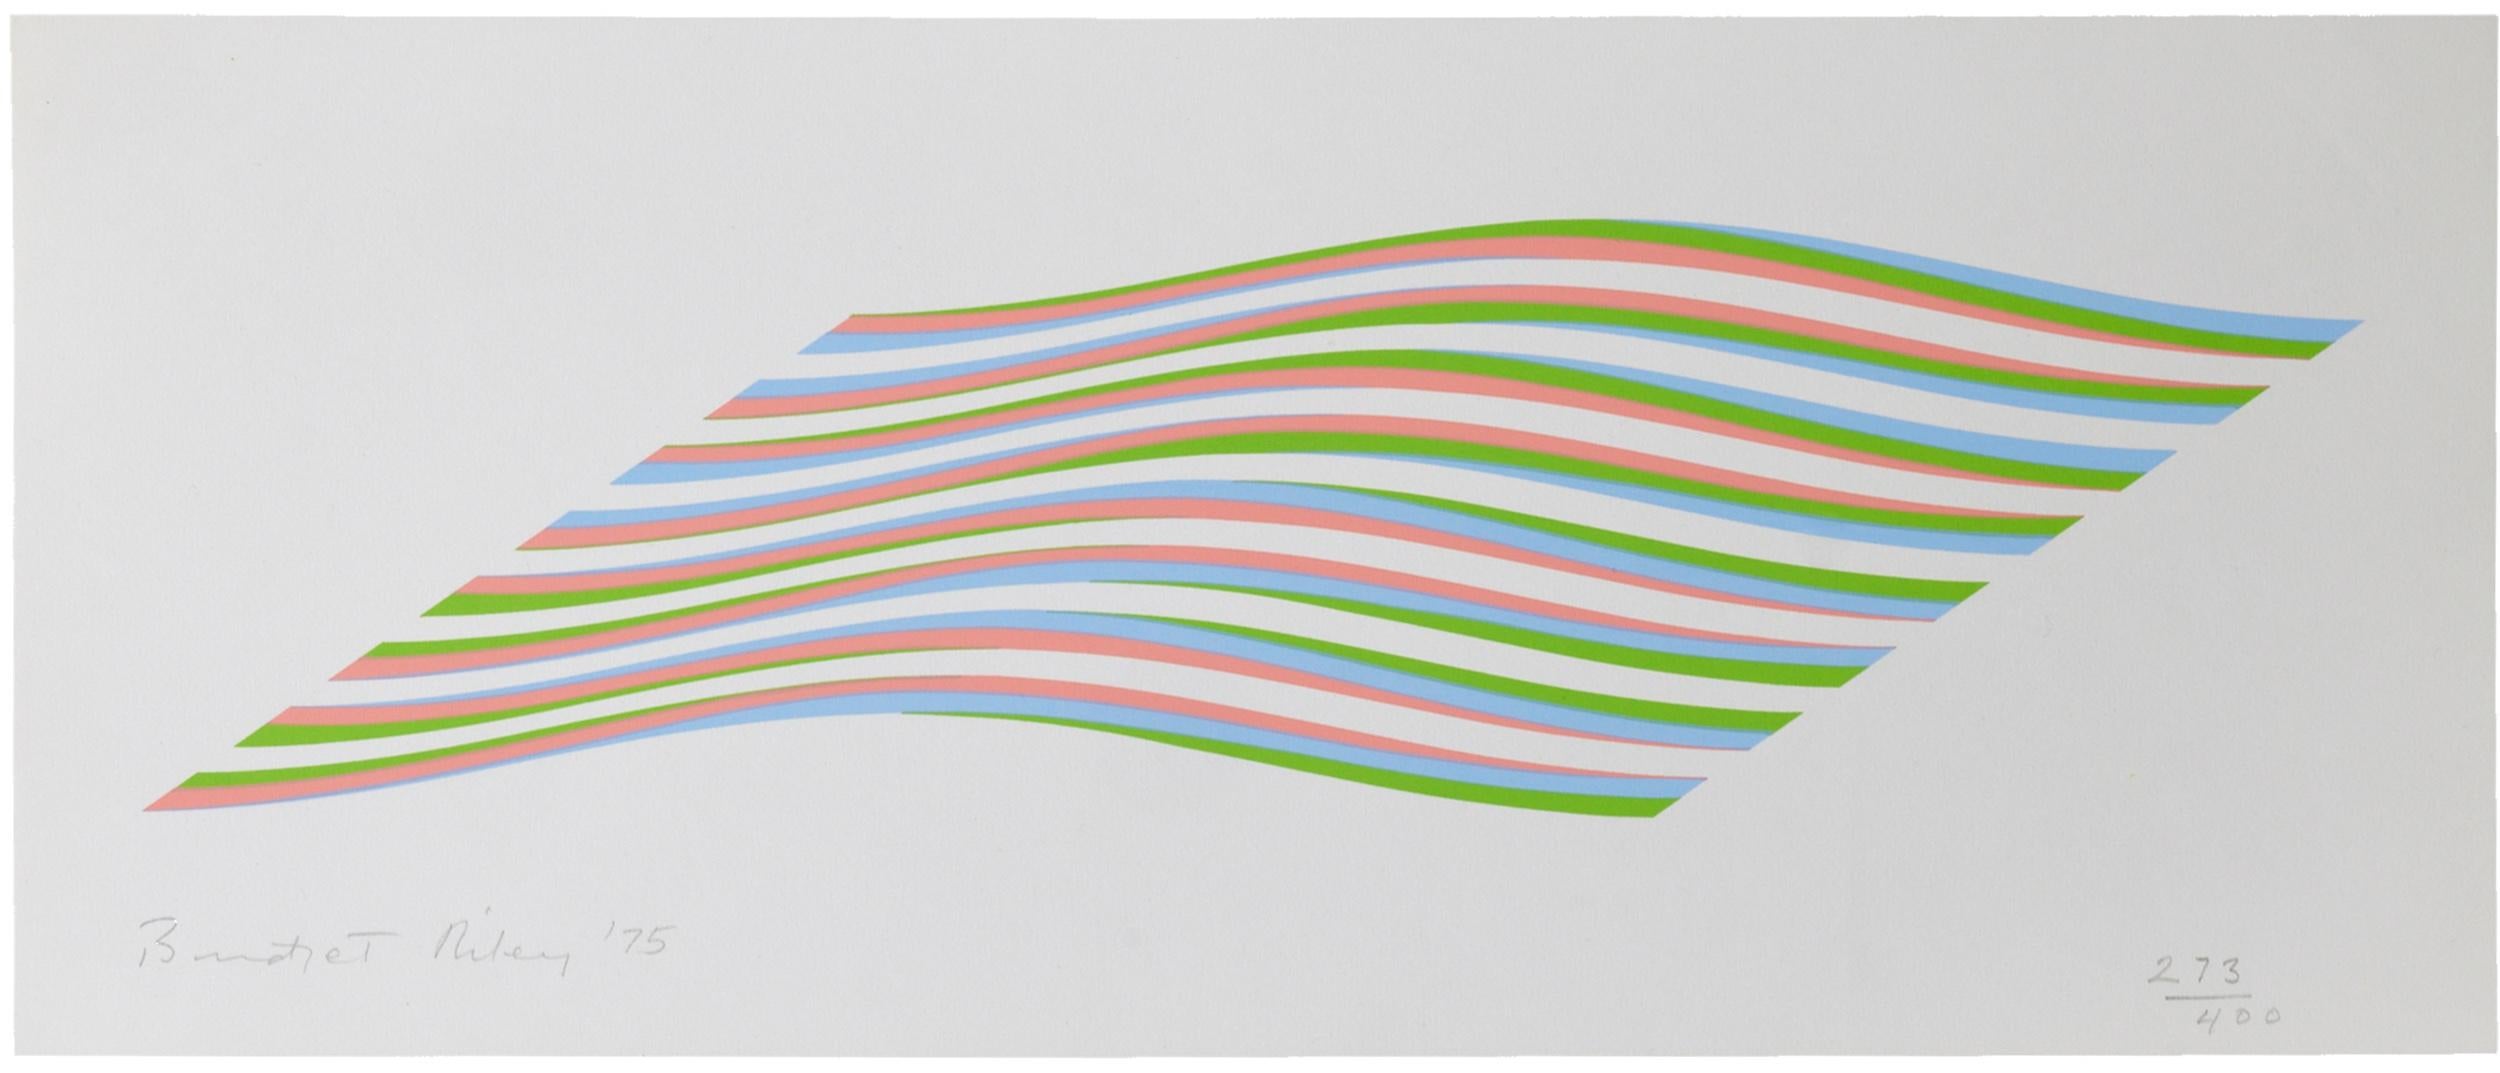 Untitled [Wave], 1975
Bridget Riley

Screenprint in colours, on wove
Signed, dated and numbered from the edition of 400
Printed by Graham Henderson, London
Published by Galerie Beyeler, Basel
Image: 11.5 × 42.8 cm (4.5 × 16.8 in)
Sheet: 19.9 × 48 cm